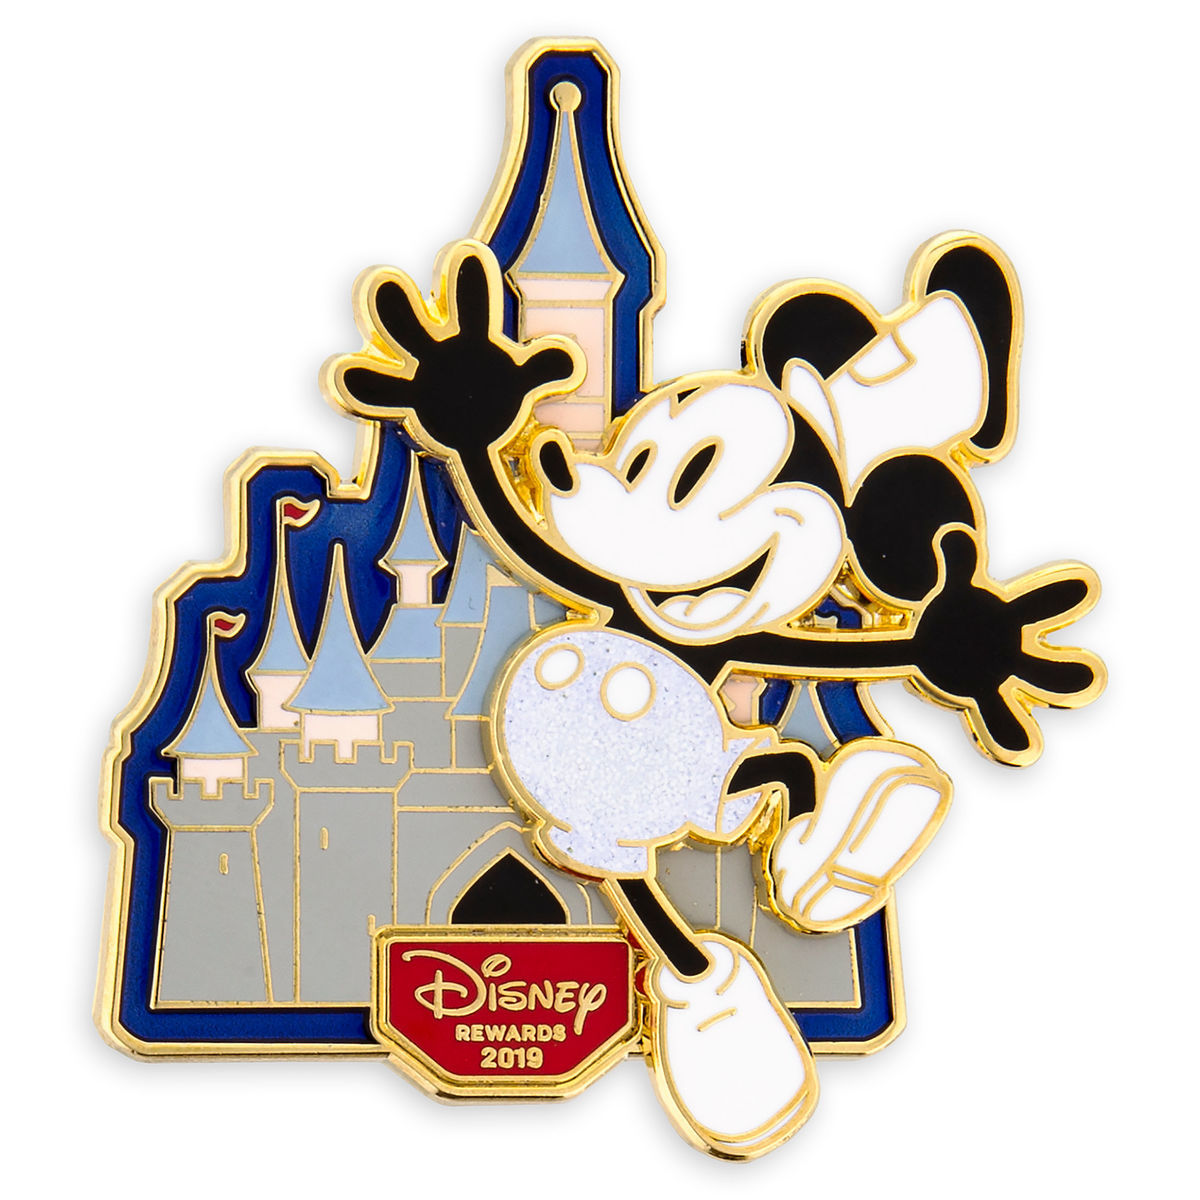 Mickey Mouse Steamboat Willie Pin Exclusively For Disney Visa Card Members